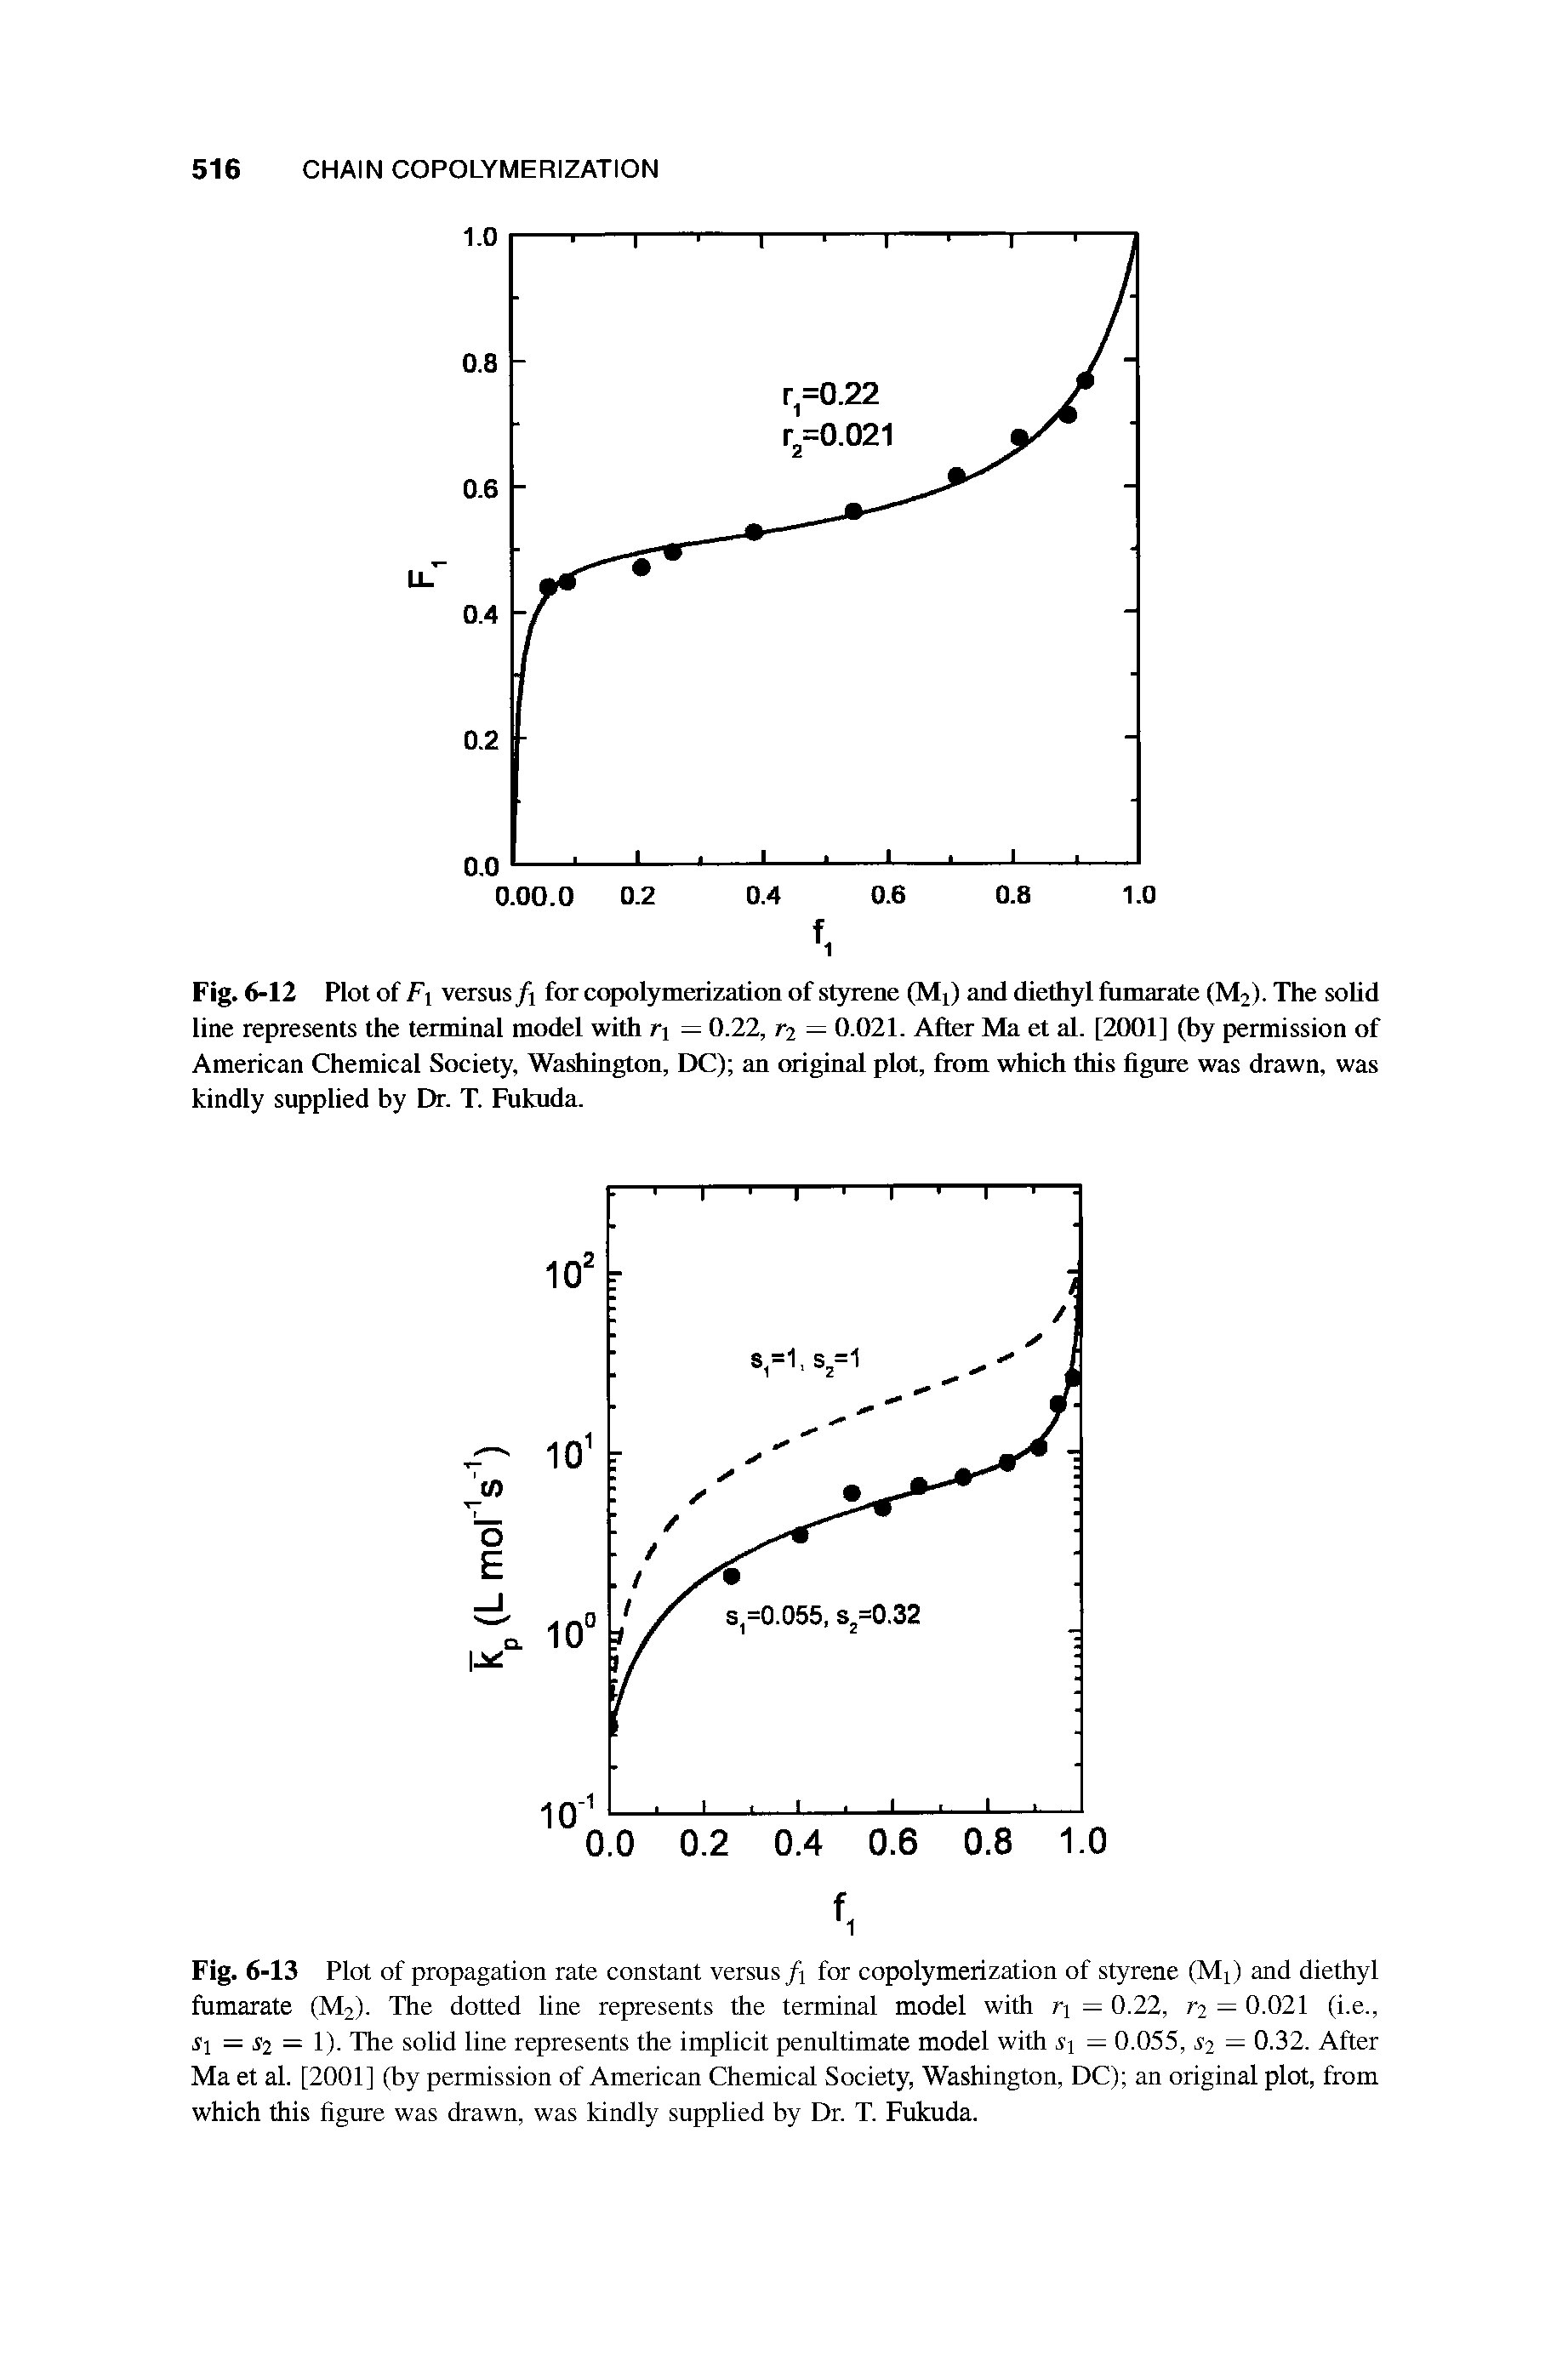 Fig. 6-12 Plot of Fi versus/i for copolymerization of styrene (MJ and diethyl fumarate (M2). The solid line represents the terminal model with r — 0.22, r2 — 0.021. After Ma et al. [2001] (by permission of American Chemical Society, Washington, DC) an original plot, from which this figure was drawn, was kindly supplied by Dr. T. Fukuda.